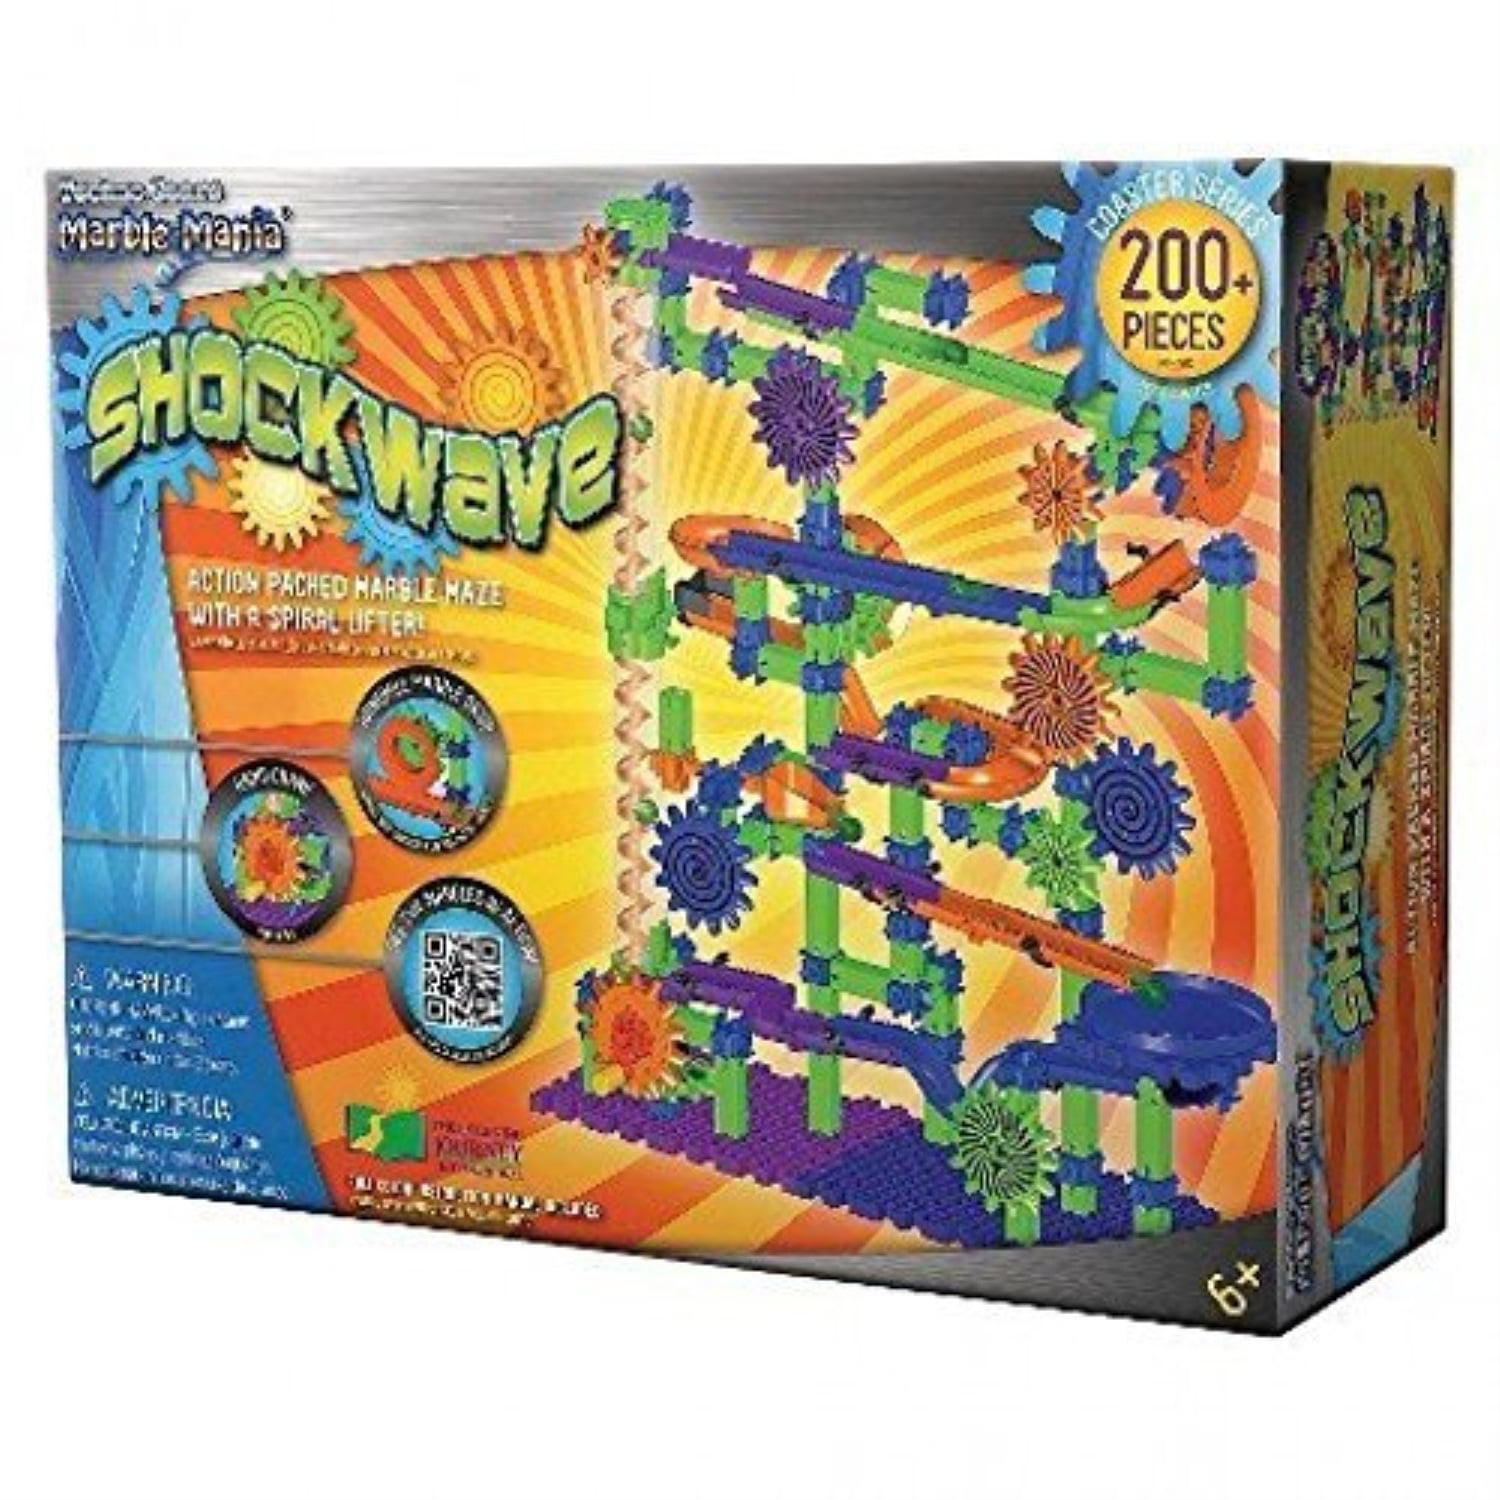 Piece Techno Gears MARBLE MANIA Shockwave in BOX Toy Interlocking Building Details about   200 